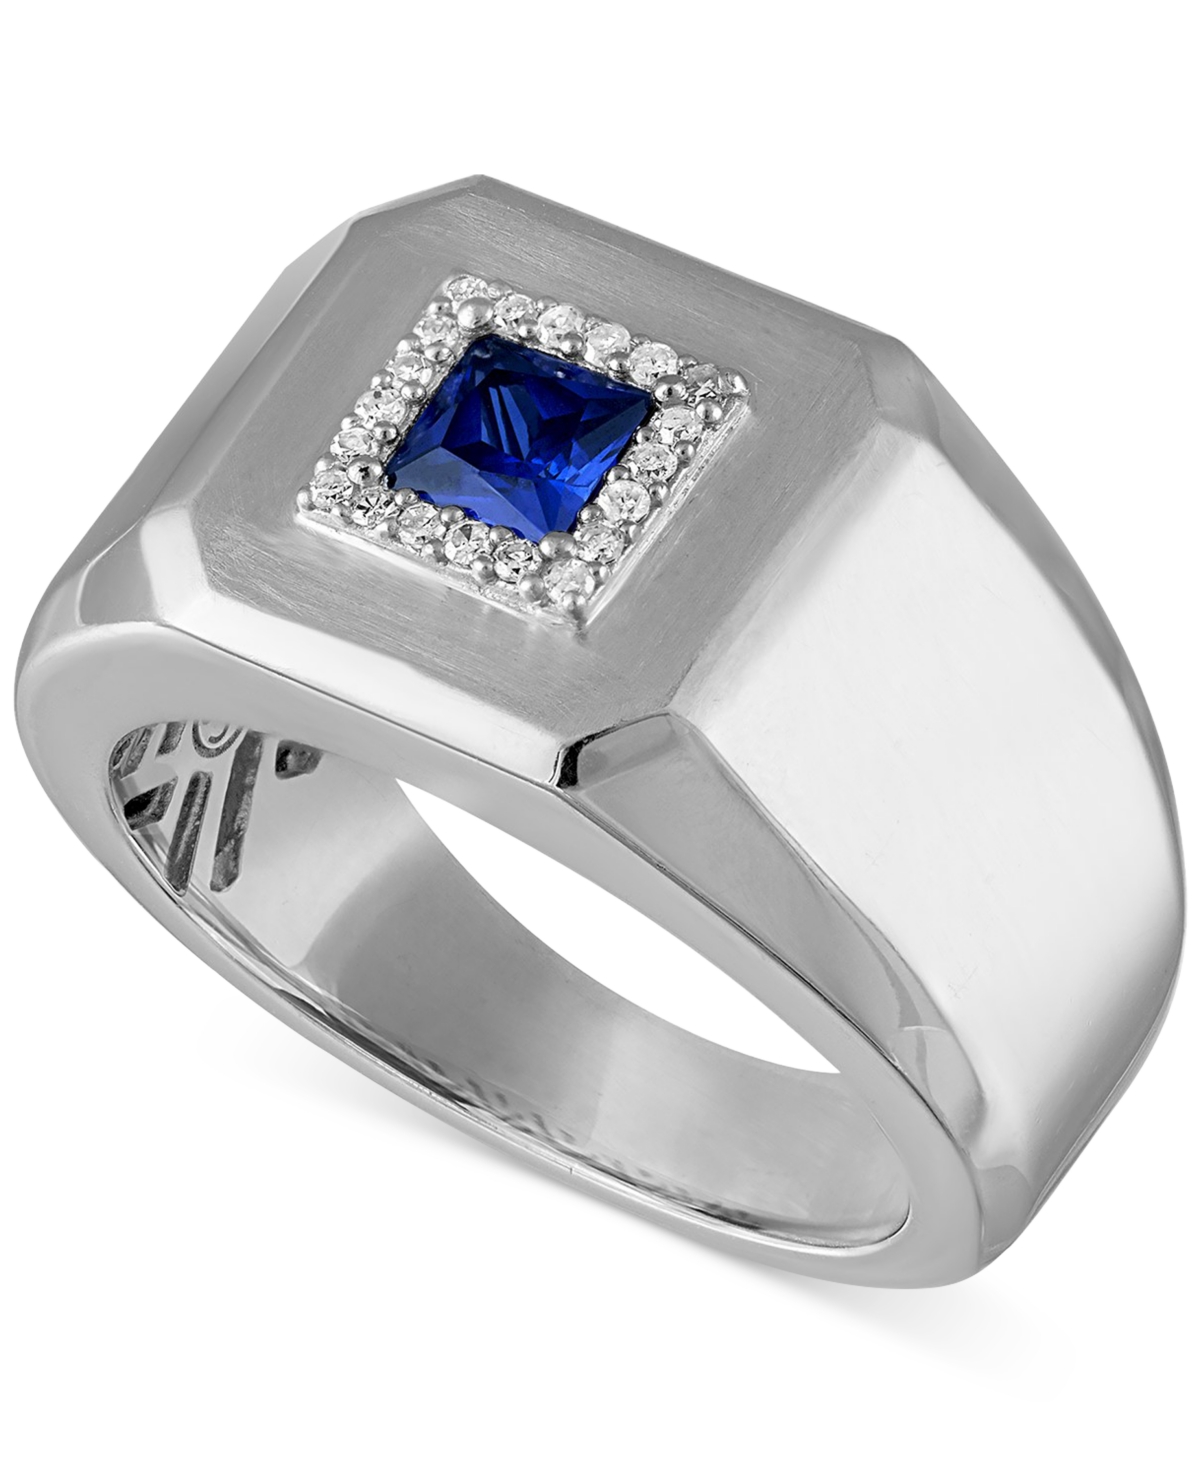 Men's Lab Created Sapphire (1/2 ct. t.w.) & Diamond (1/10 ct. t.w.) Ring in Sterling Silver - Silver